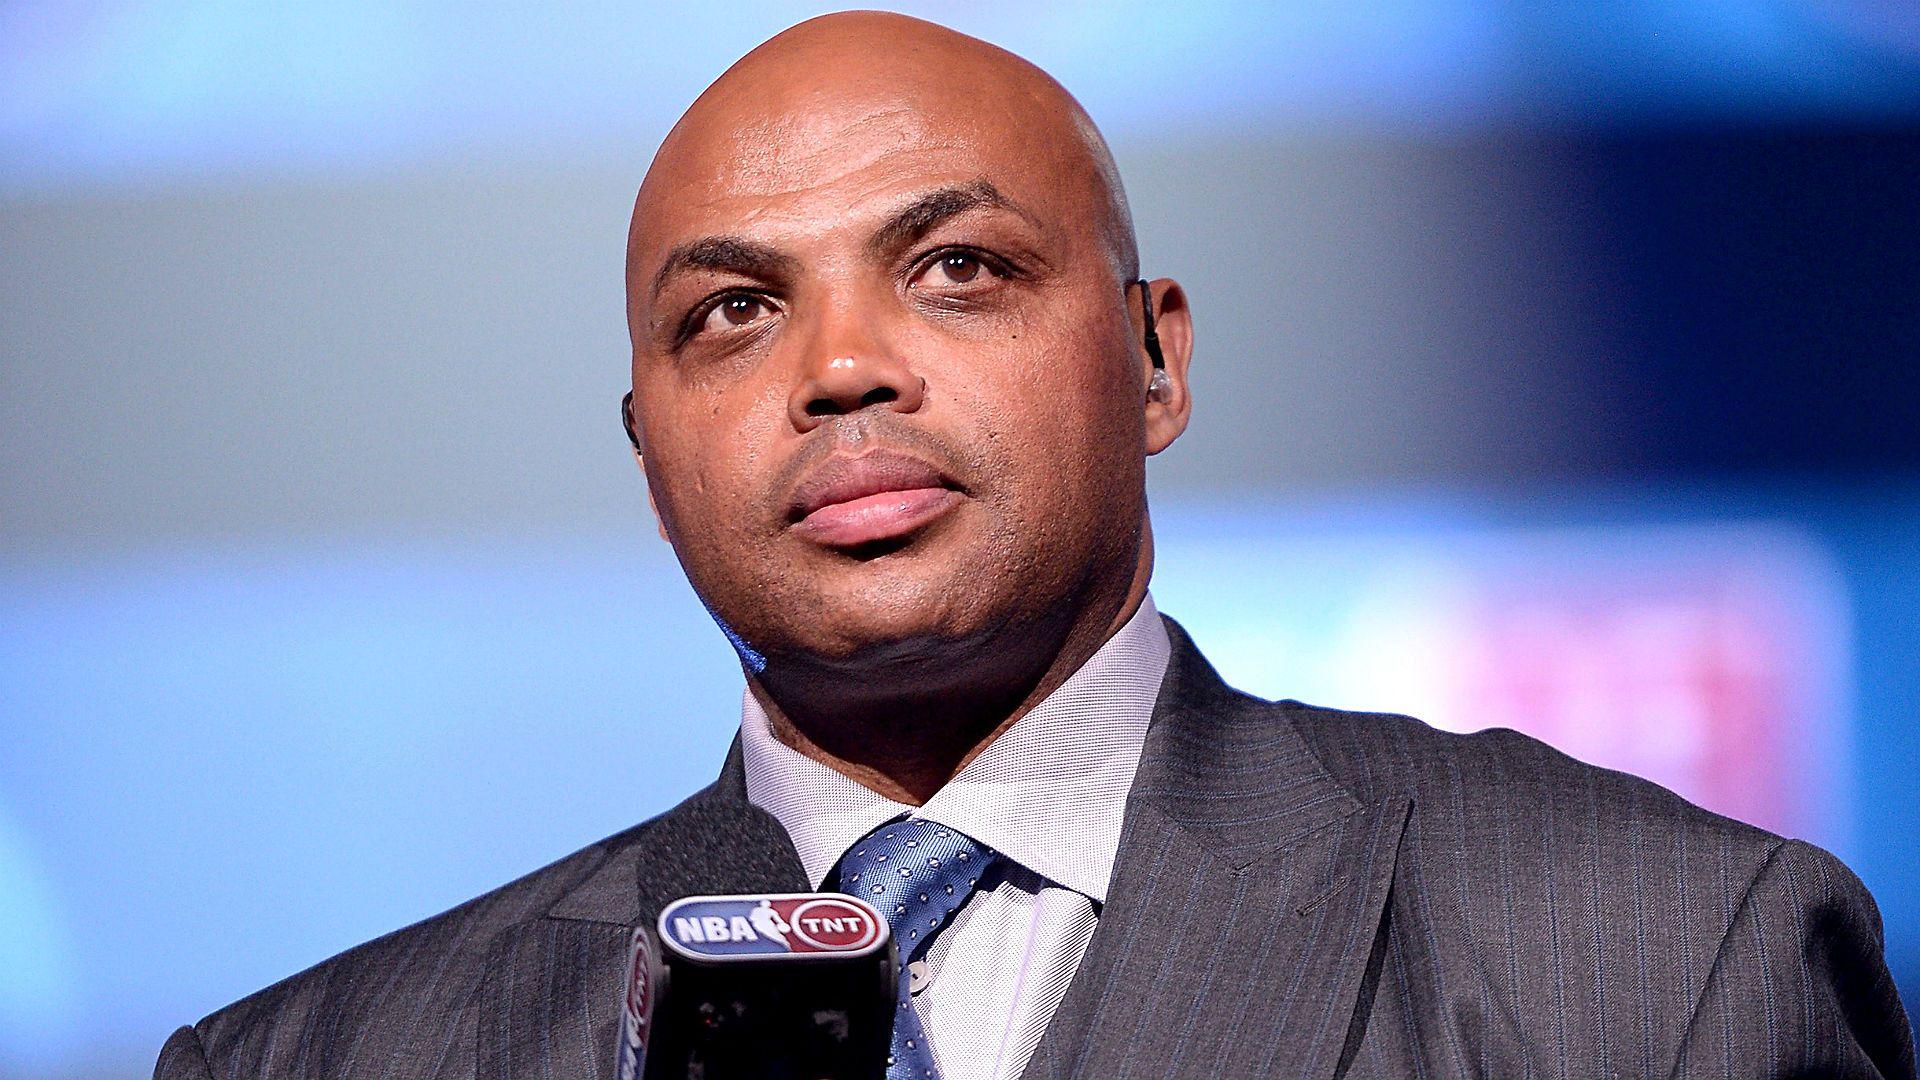 Charles Barkley to give $1 million to two Alabama schools not